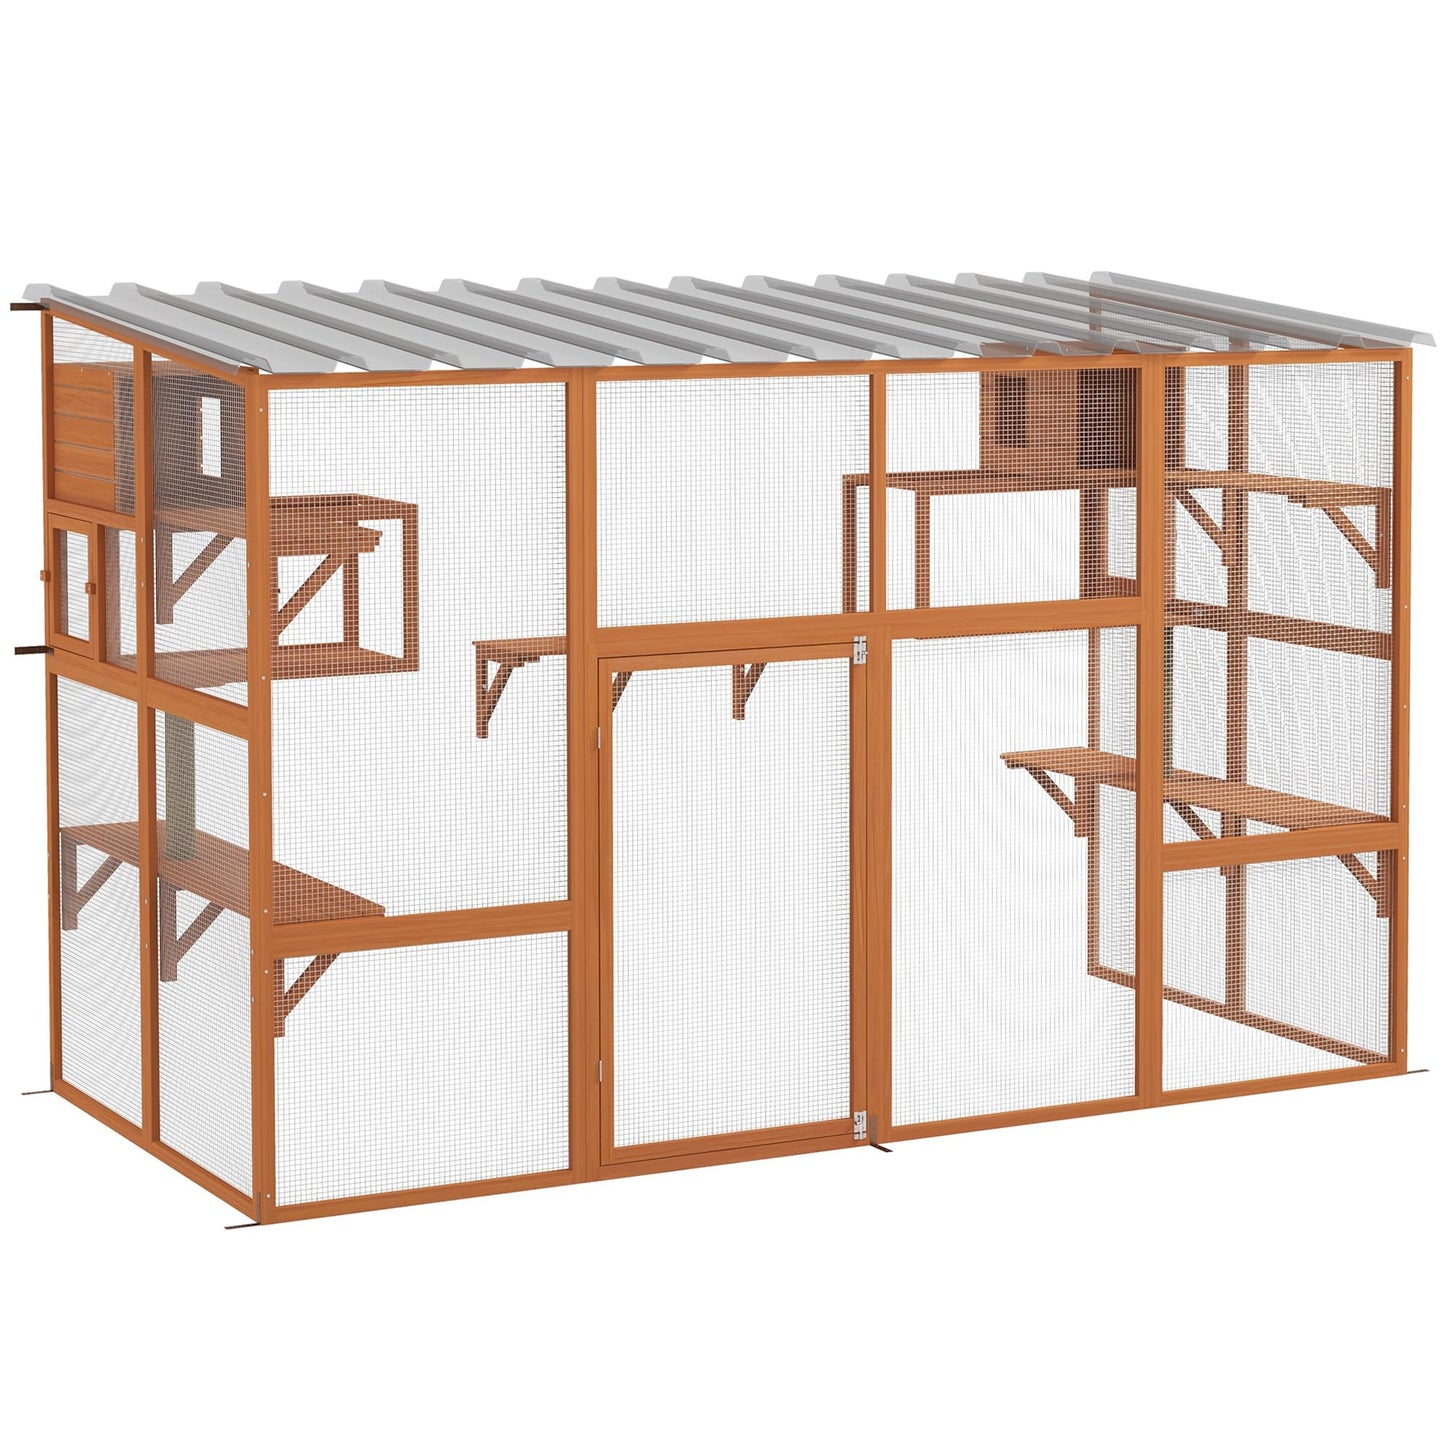 PawHut Catio, Outdoor Cat Enclosure Window Box, Wooden Cat House Playground with Scratching Posts, Weather Protection Roof for 1-5 Kitties, Resting Boxes, 118" x 55" x 75.5", Orange